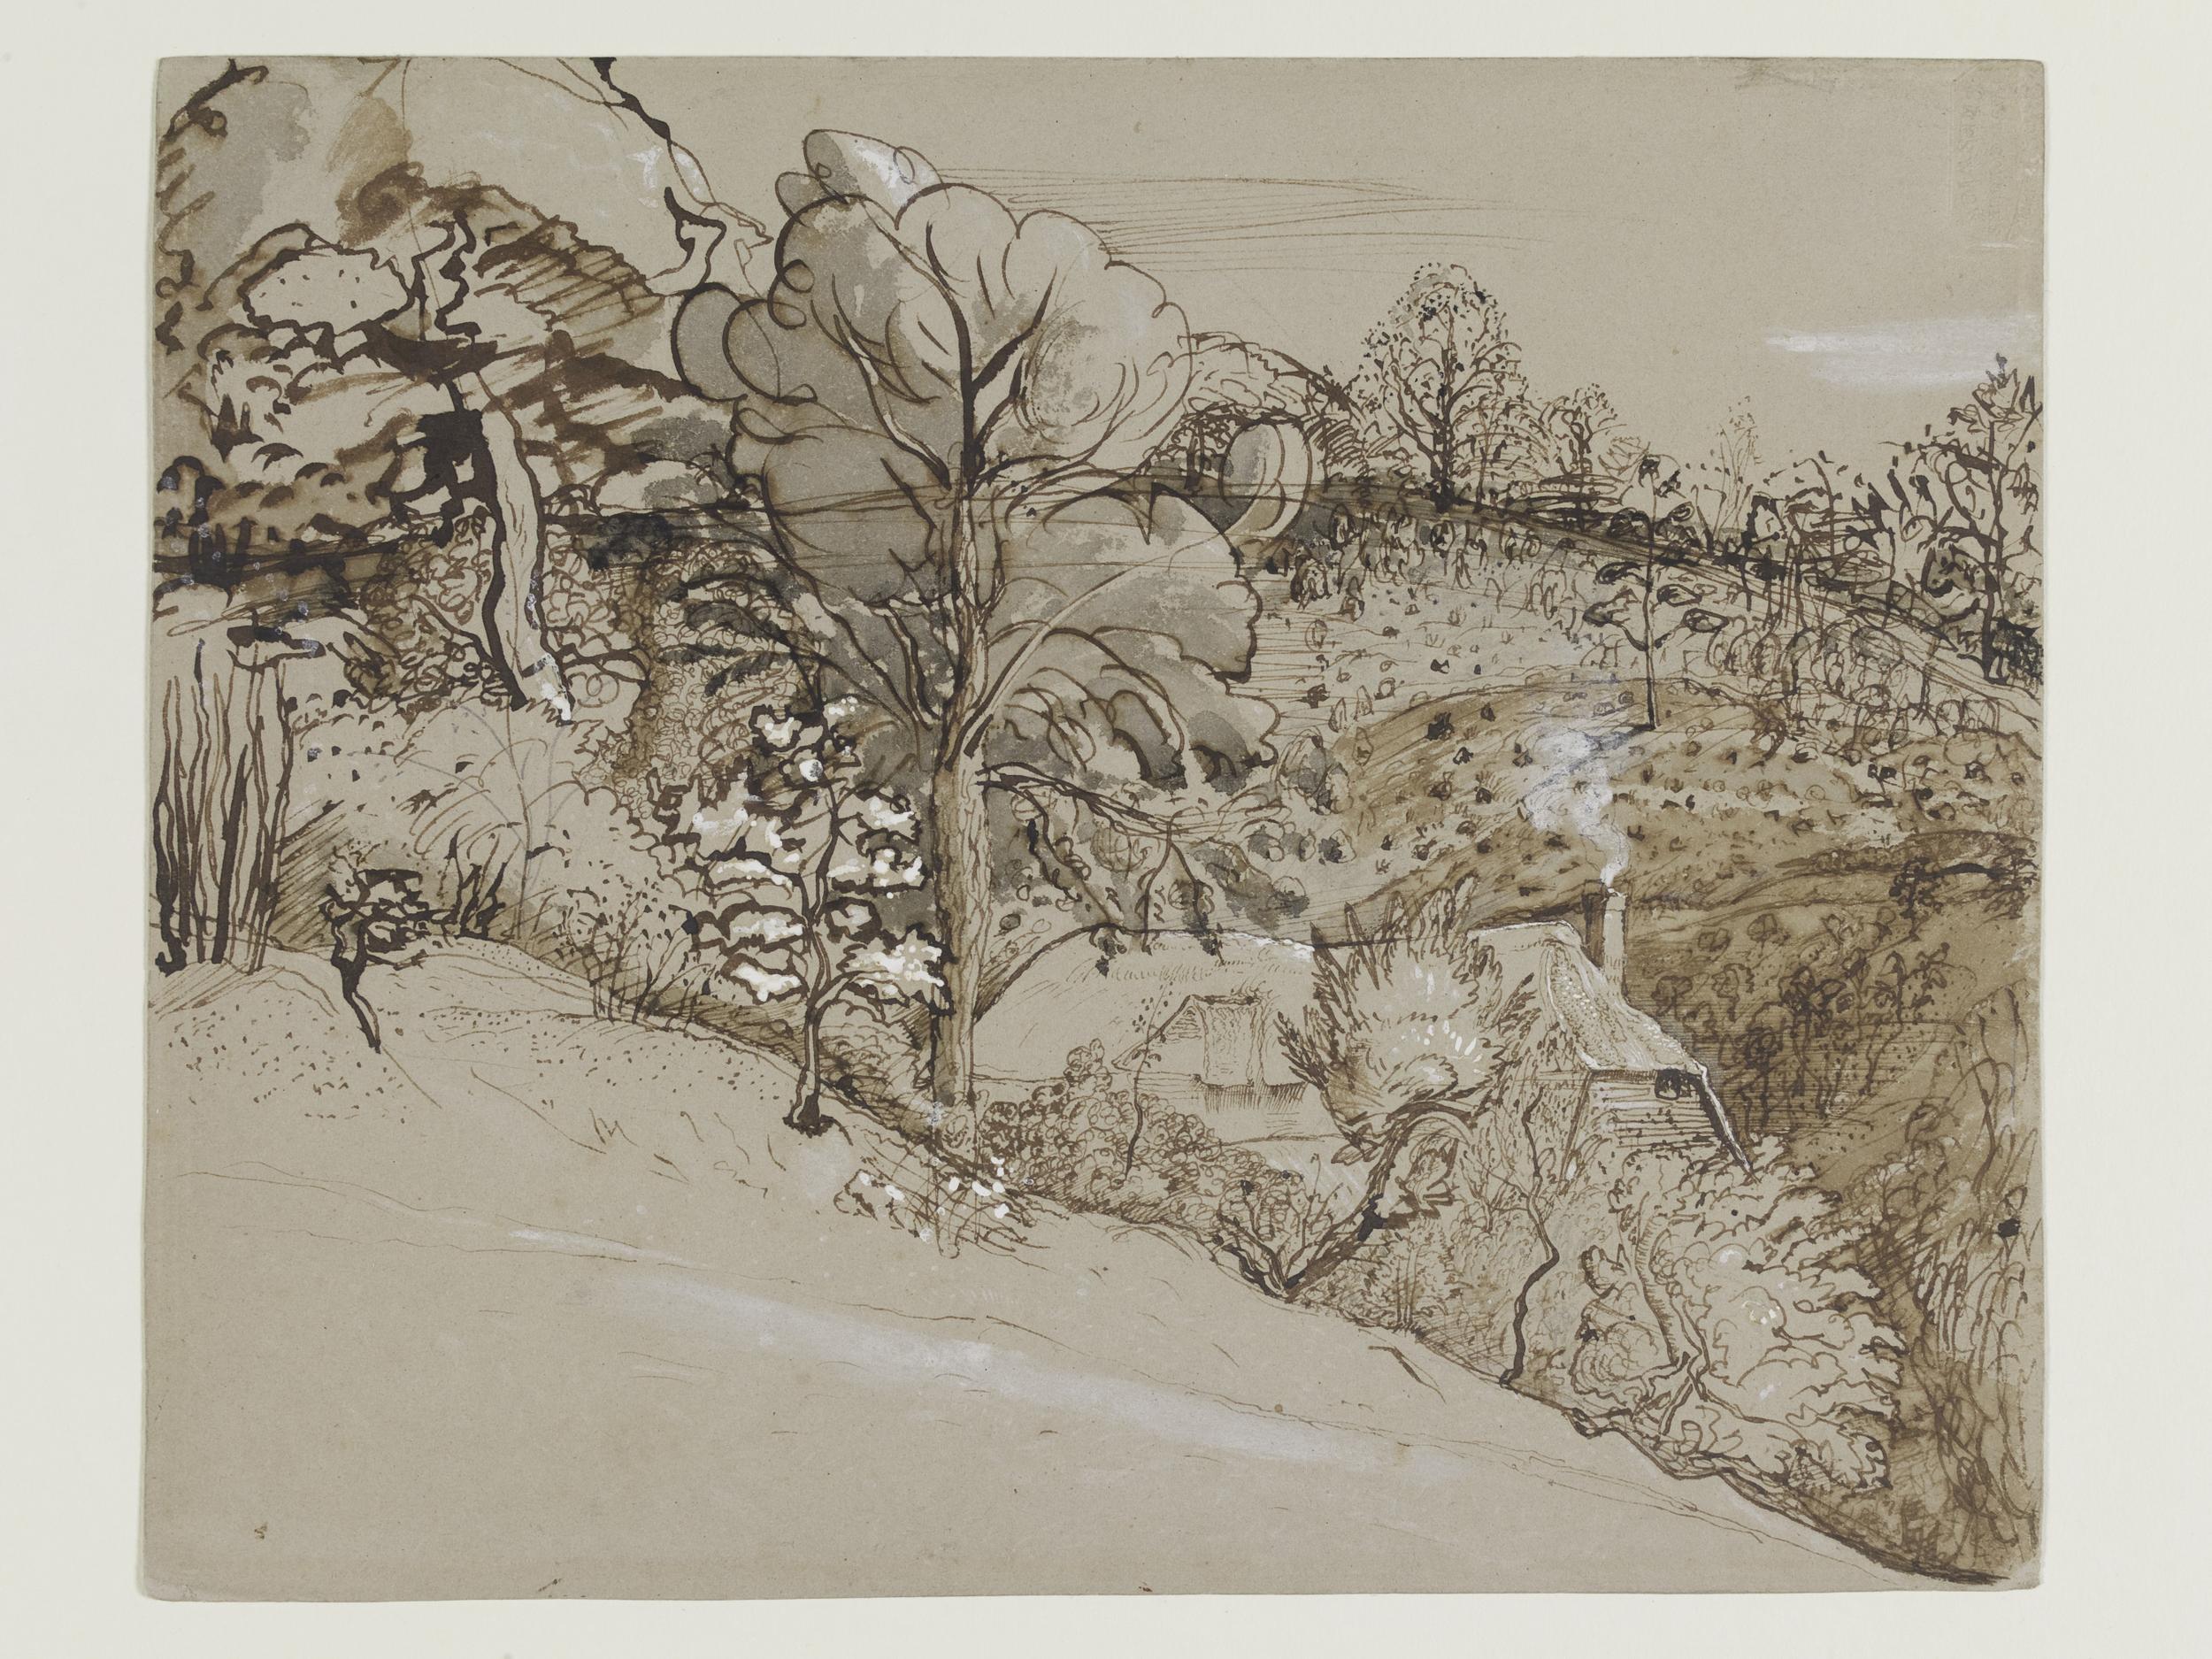 Grey sketch of hill with a house in the bottom of the valley